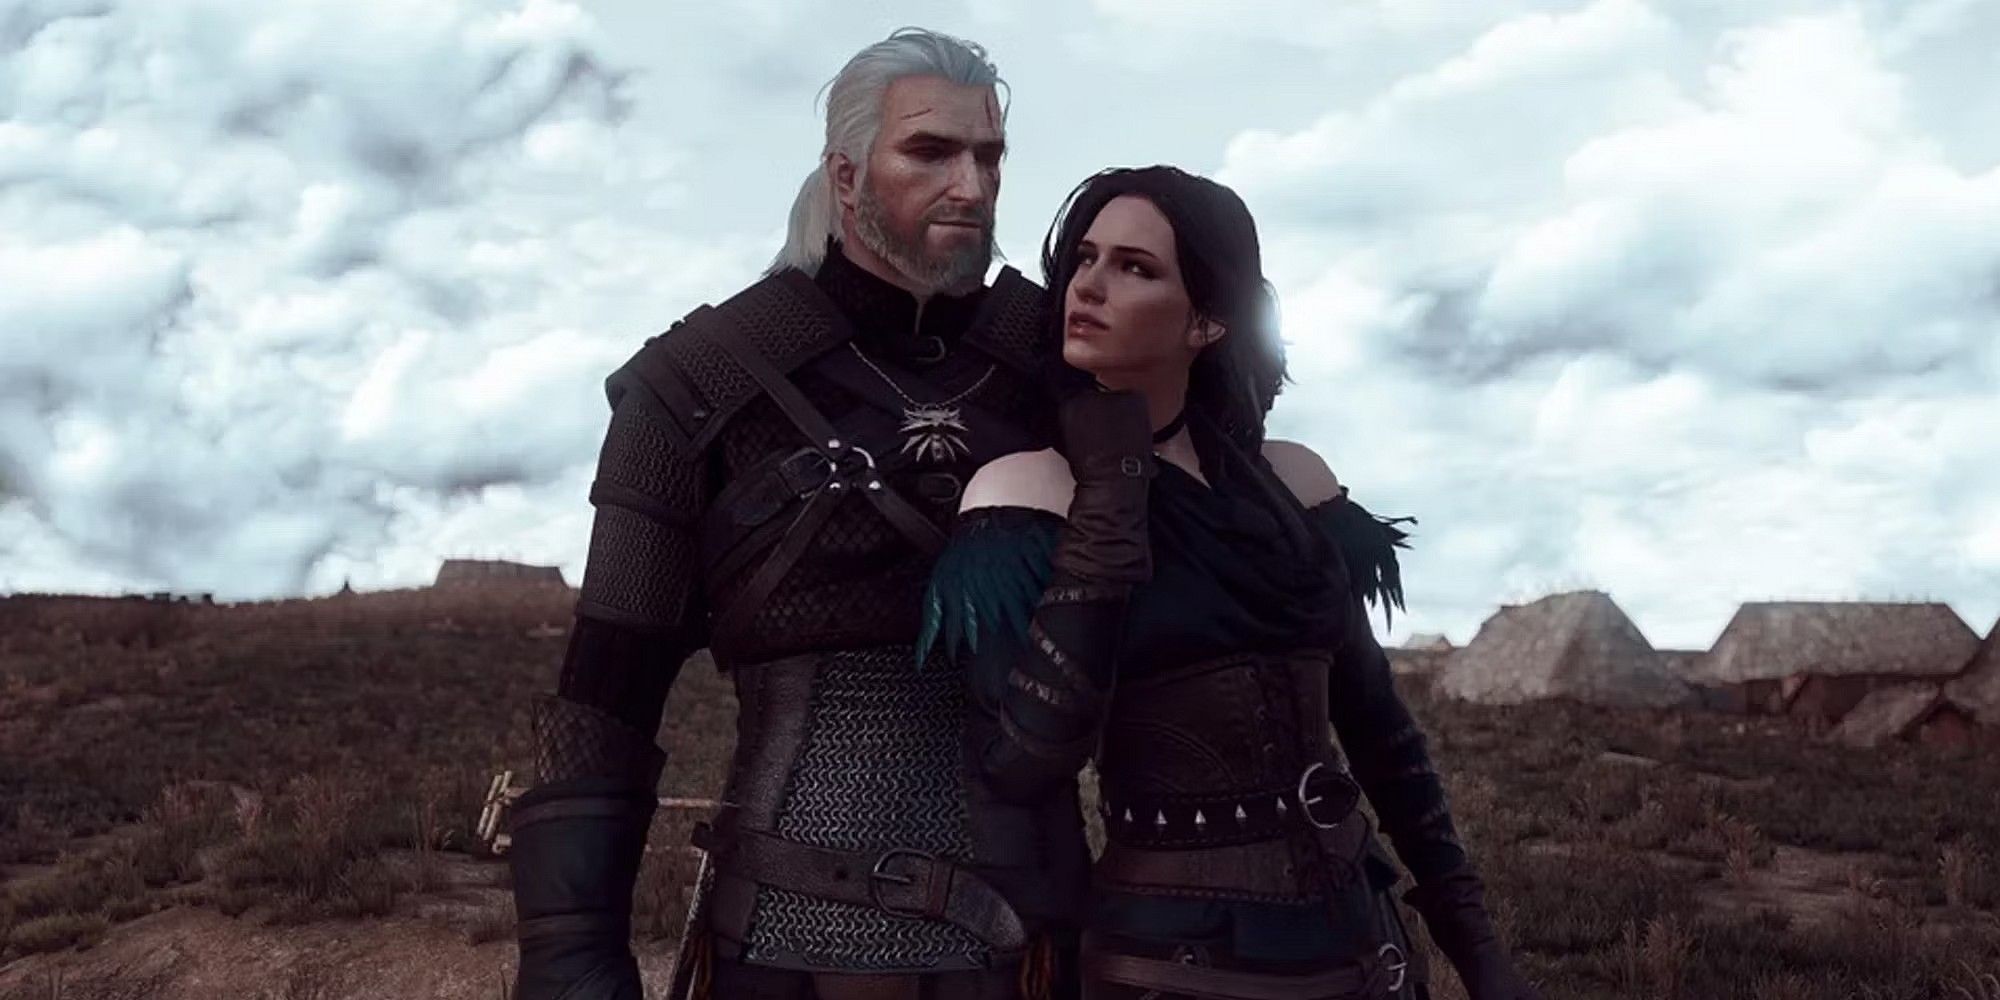 Yennefer and Geralt share a hug in the Witcher 3